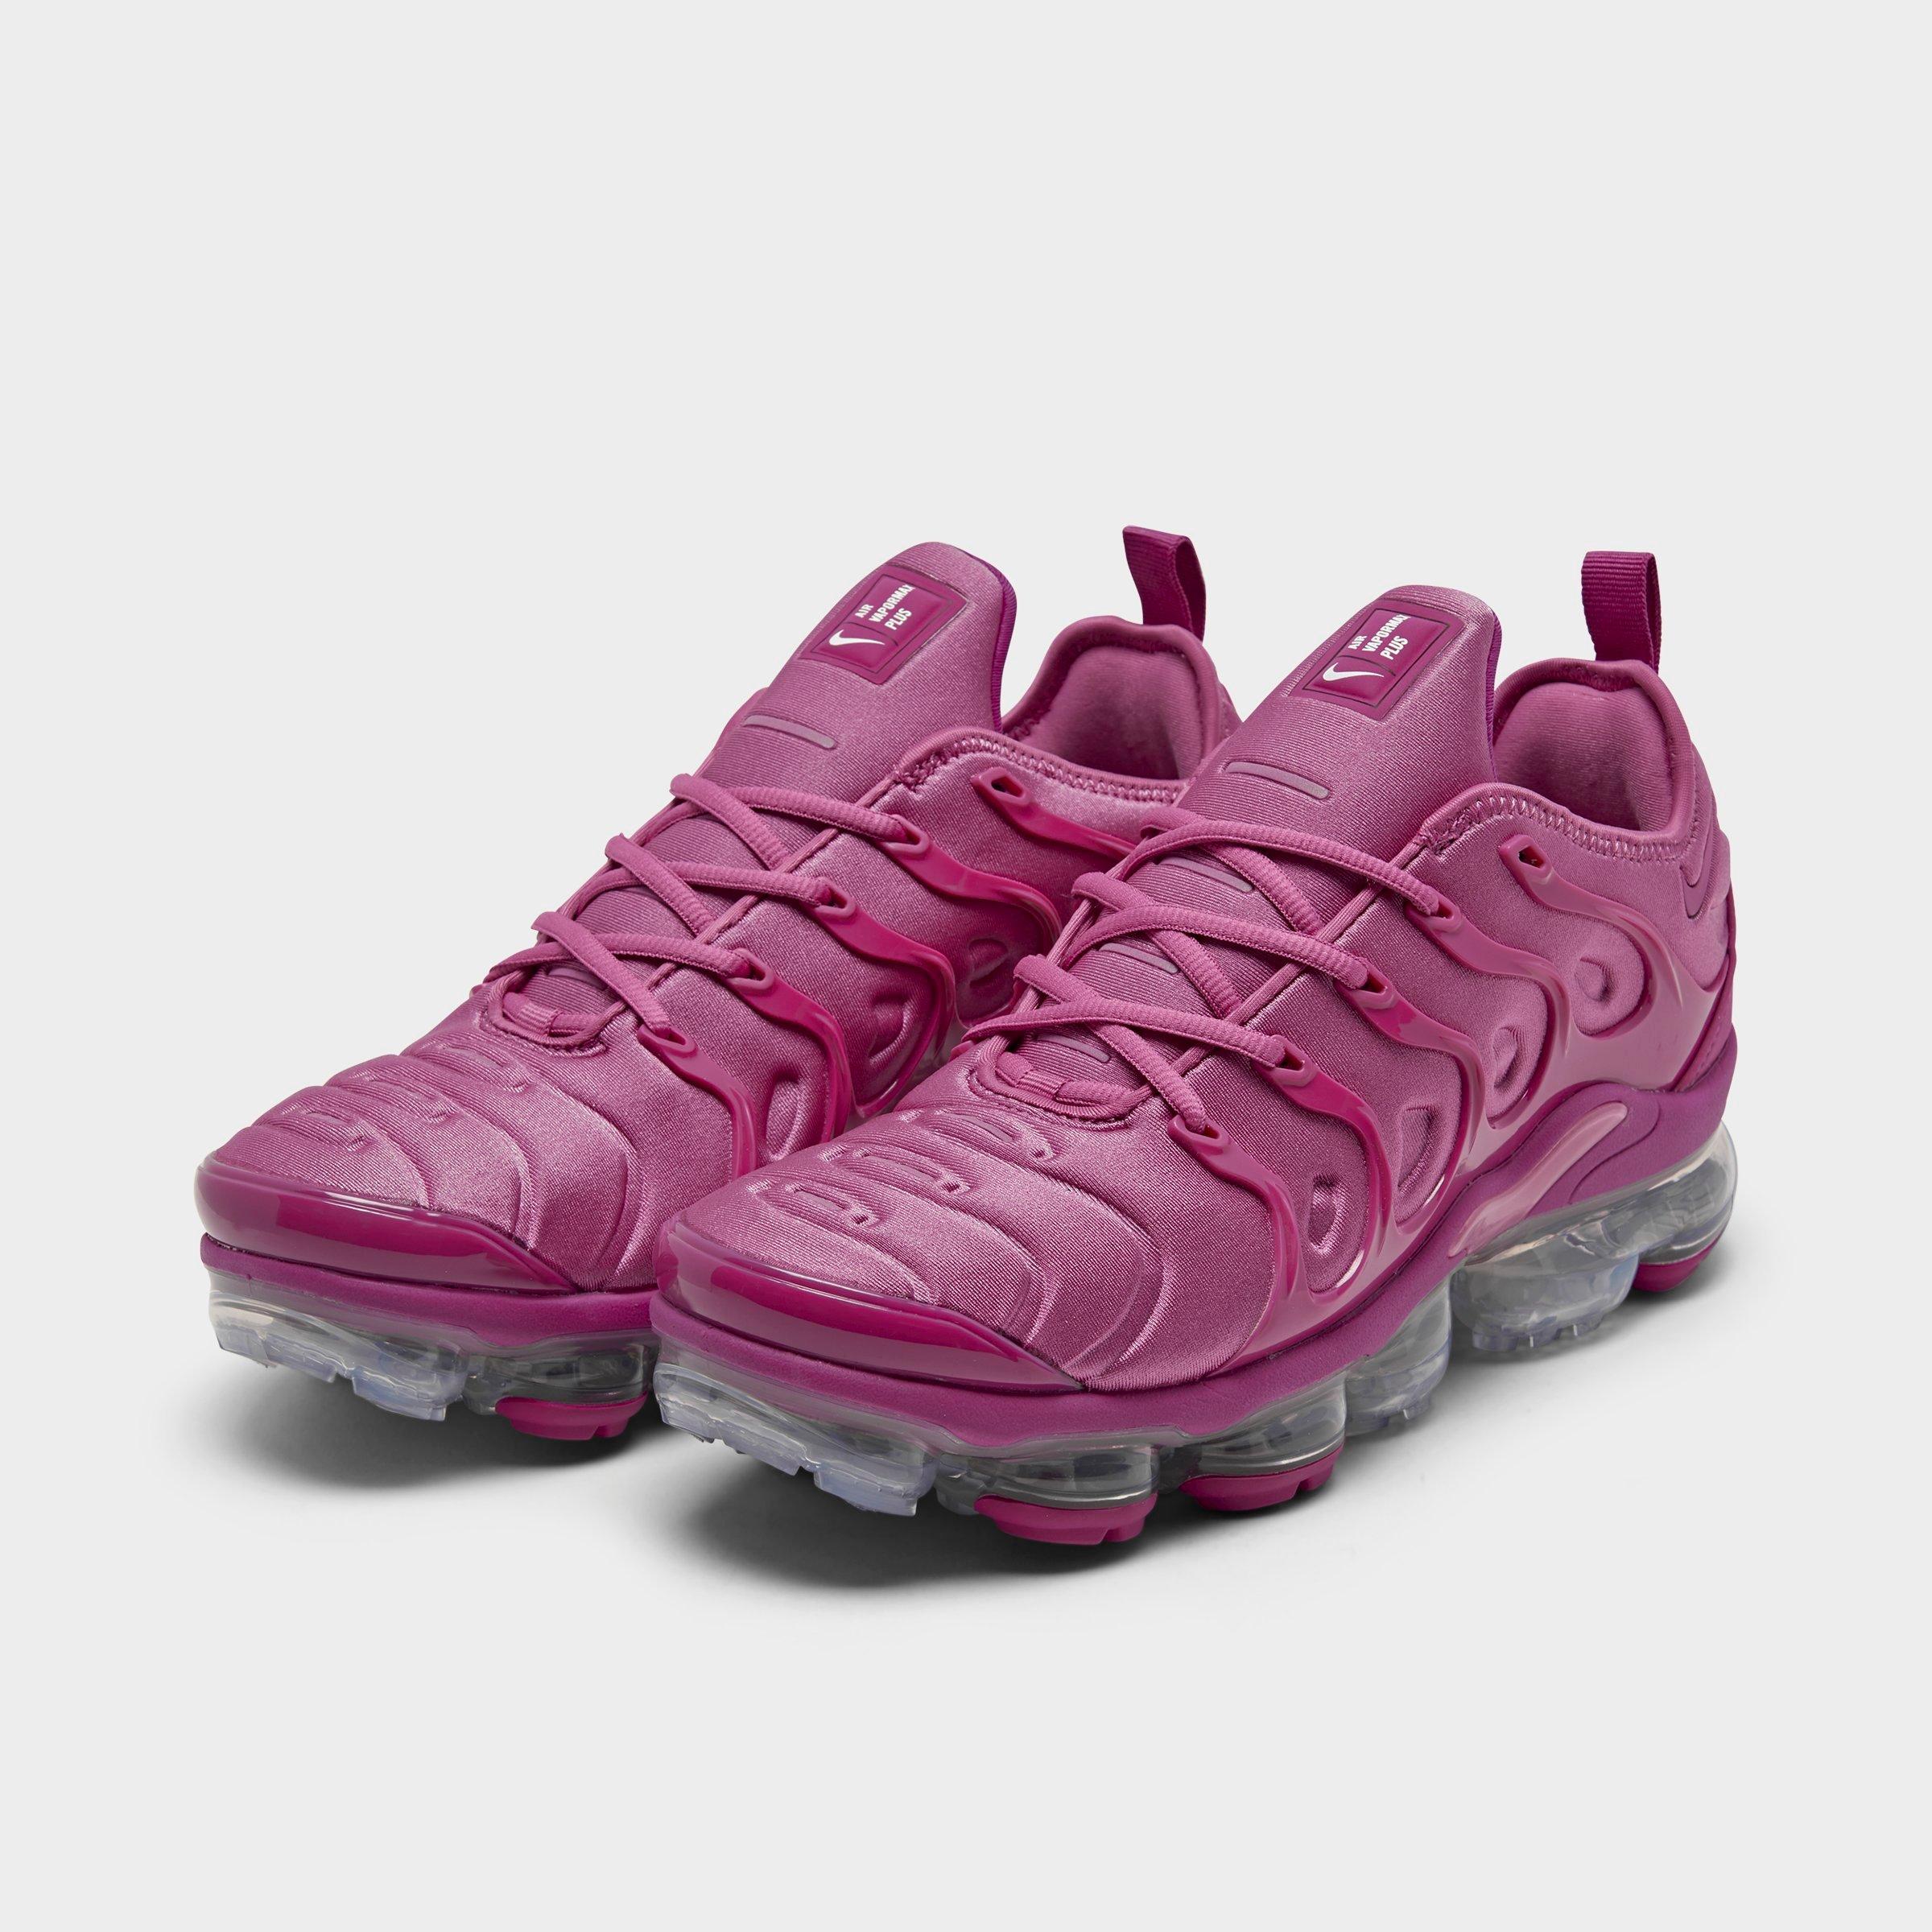 nike air vapormax plus pink and white